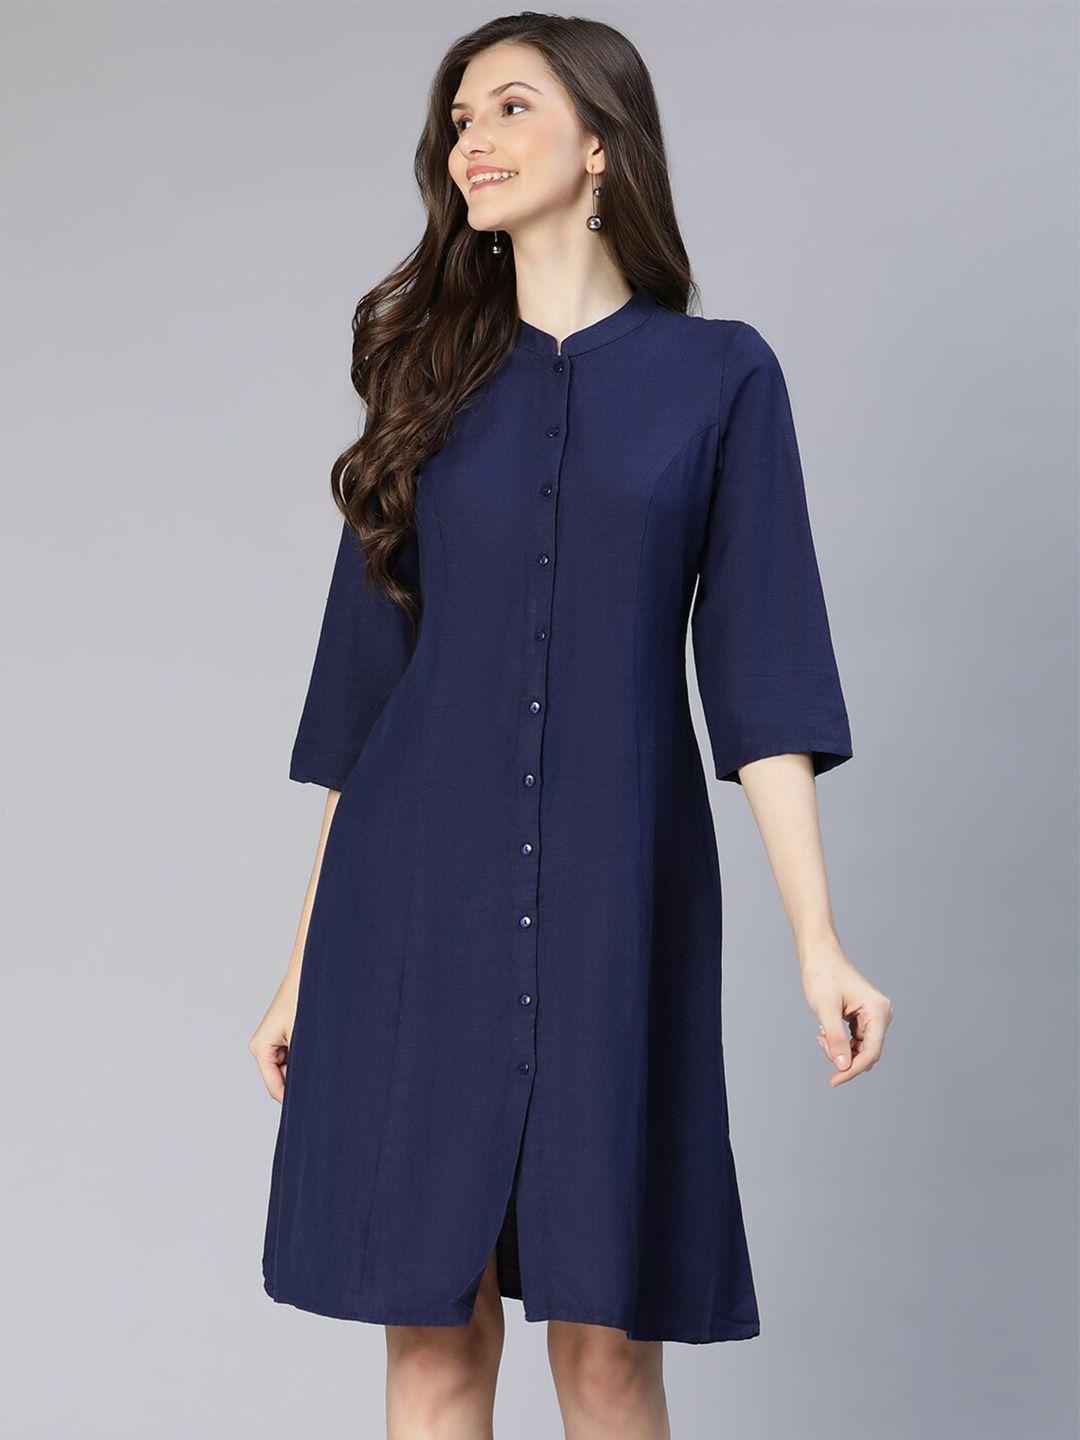 oxolloxo-navy-blue-solid-button-down-shirt-dress